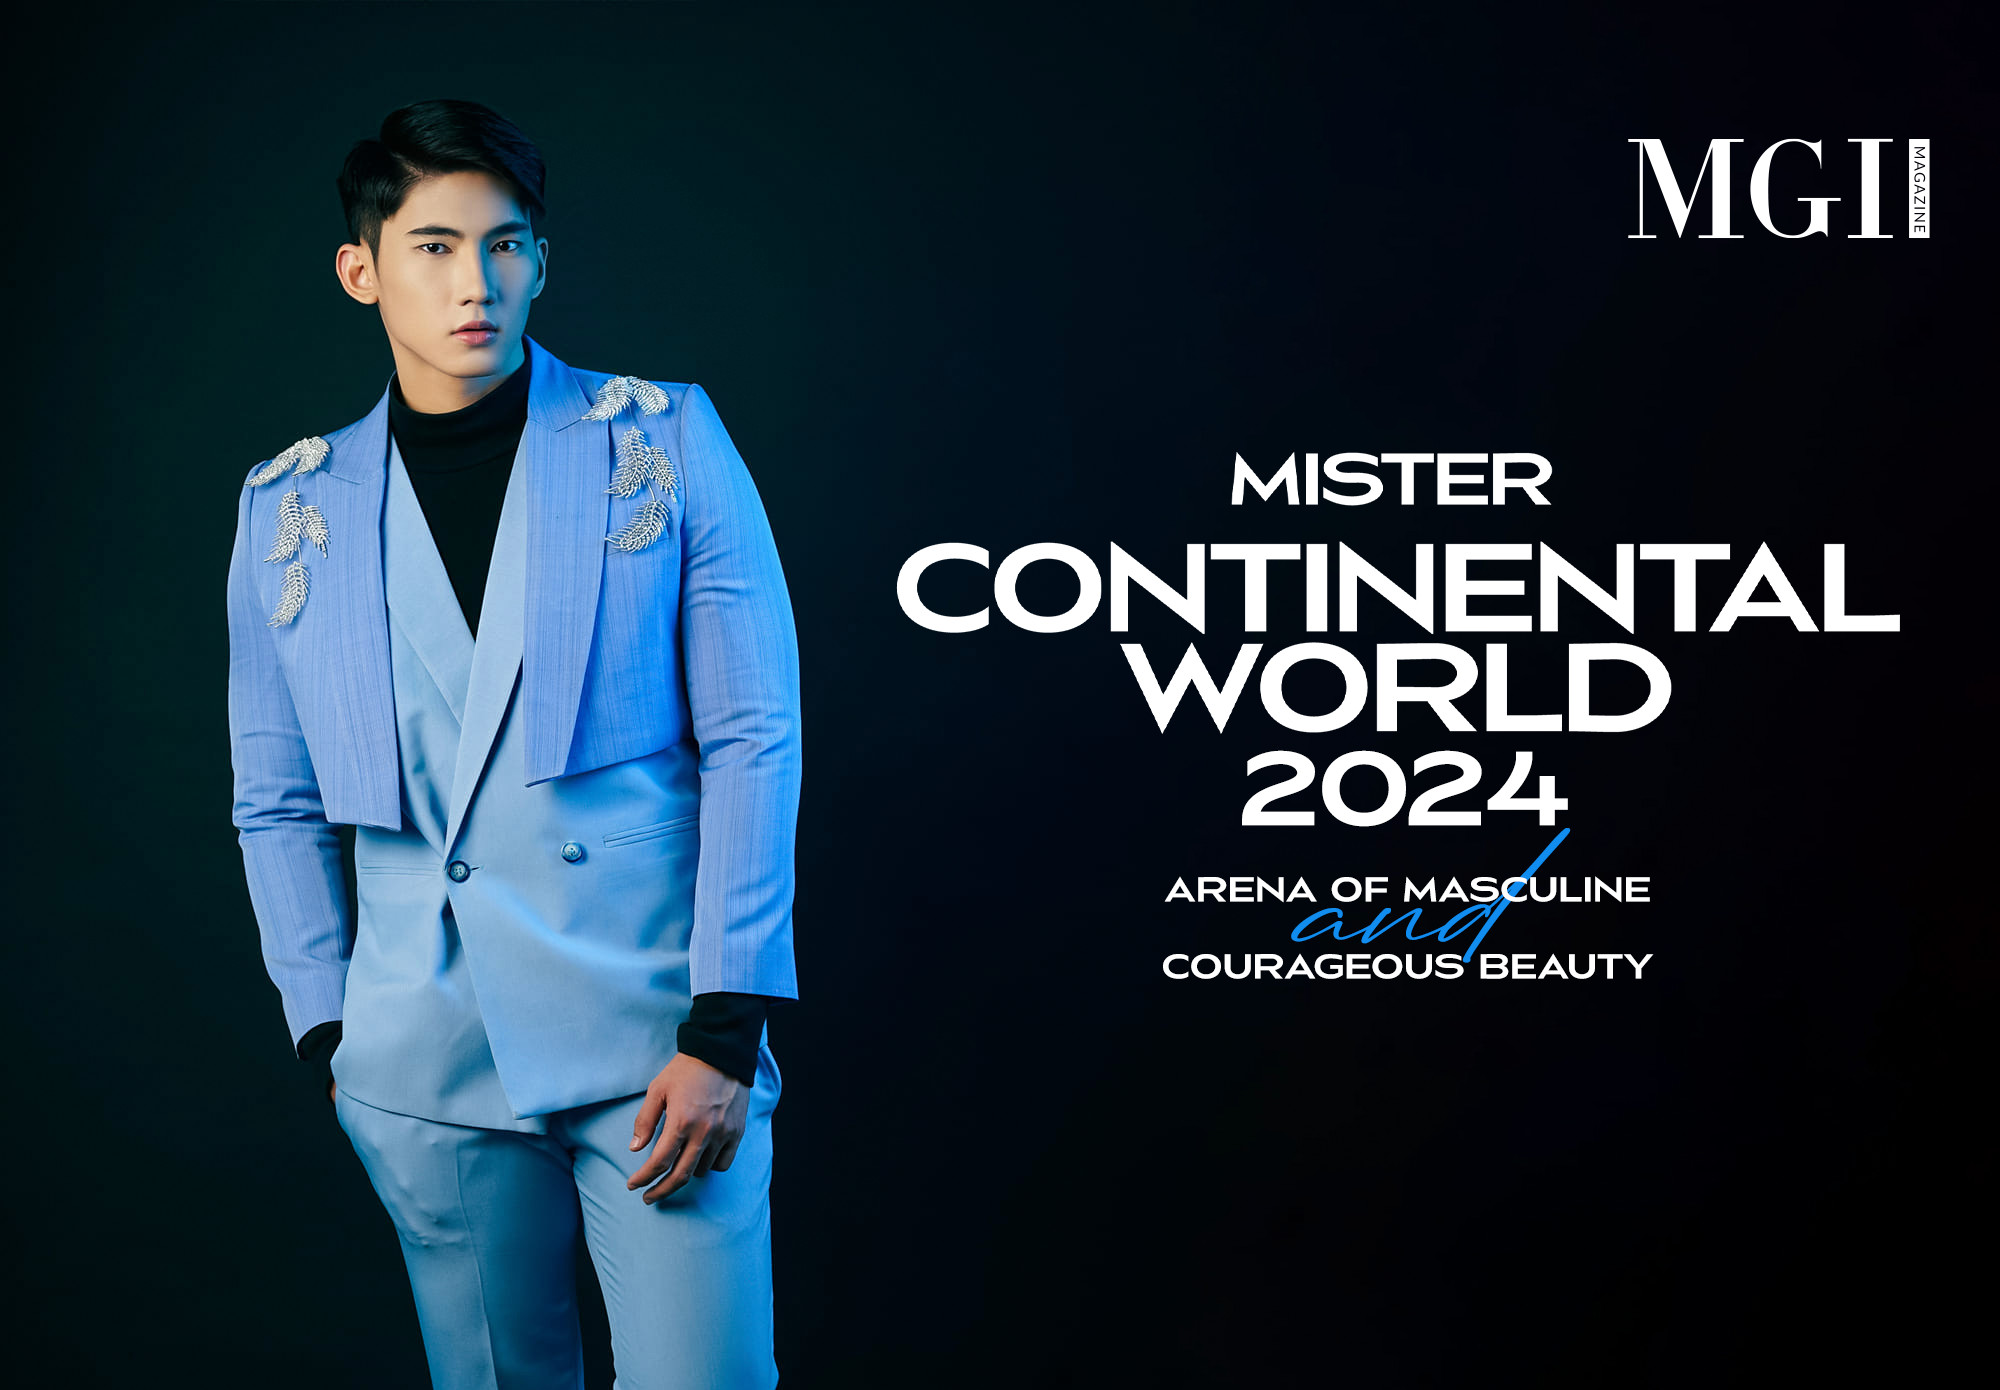 Mister Continental World 2024 - Arena of masculine and courageous beauty